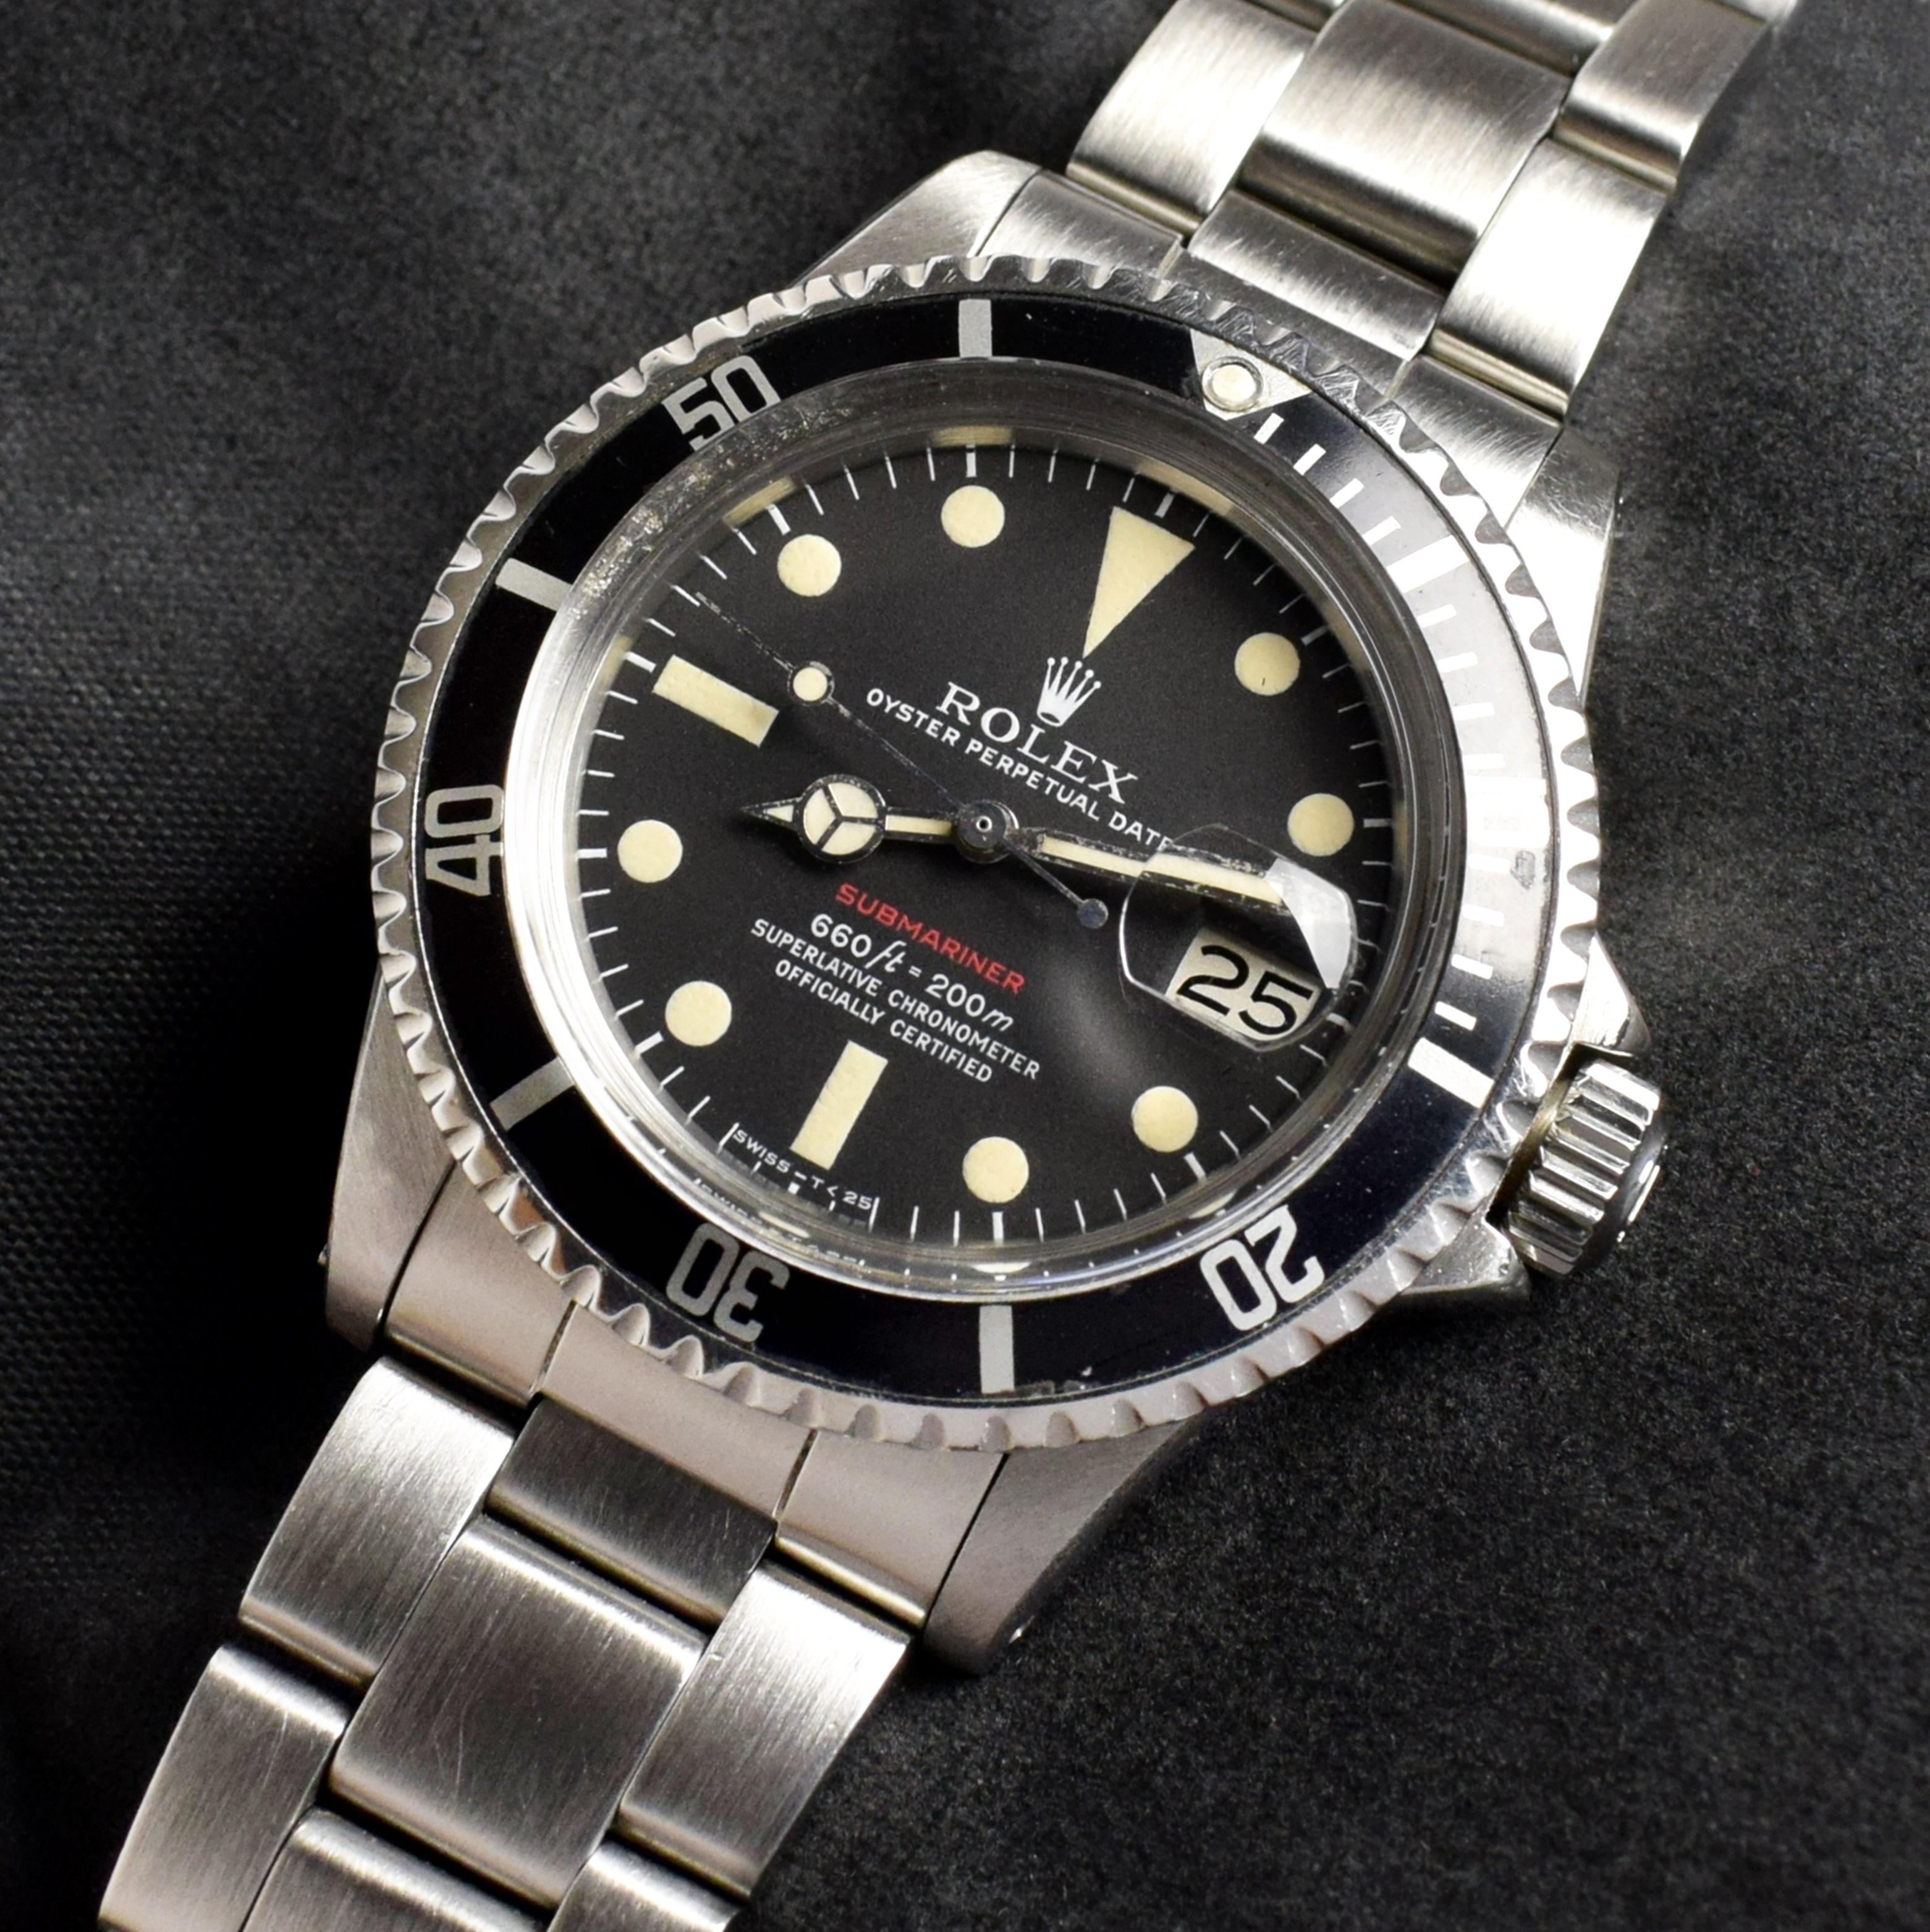 Brand: Vintage Rolex
Model: 1680
Year: 1972
Serial number: 27xxxxx
Reference: C03300

Case: Show sign of wear with some polishing from previous; inner case back stamped 1680

Dial: Excellent Aged Condition Tritium Dial where the lumes have turned